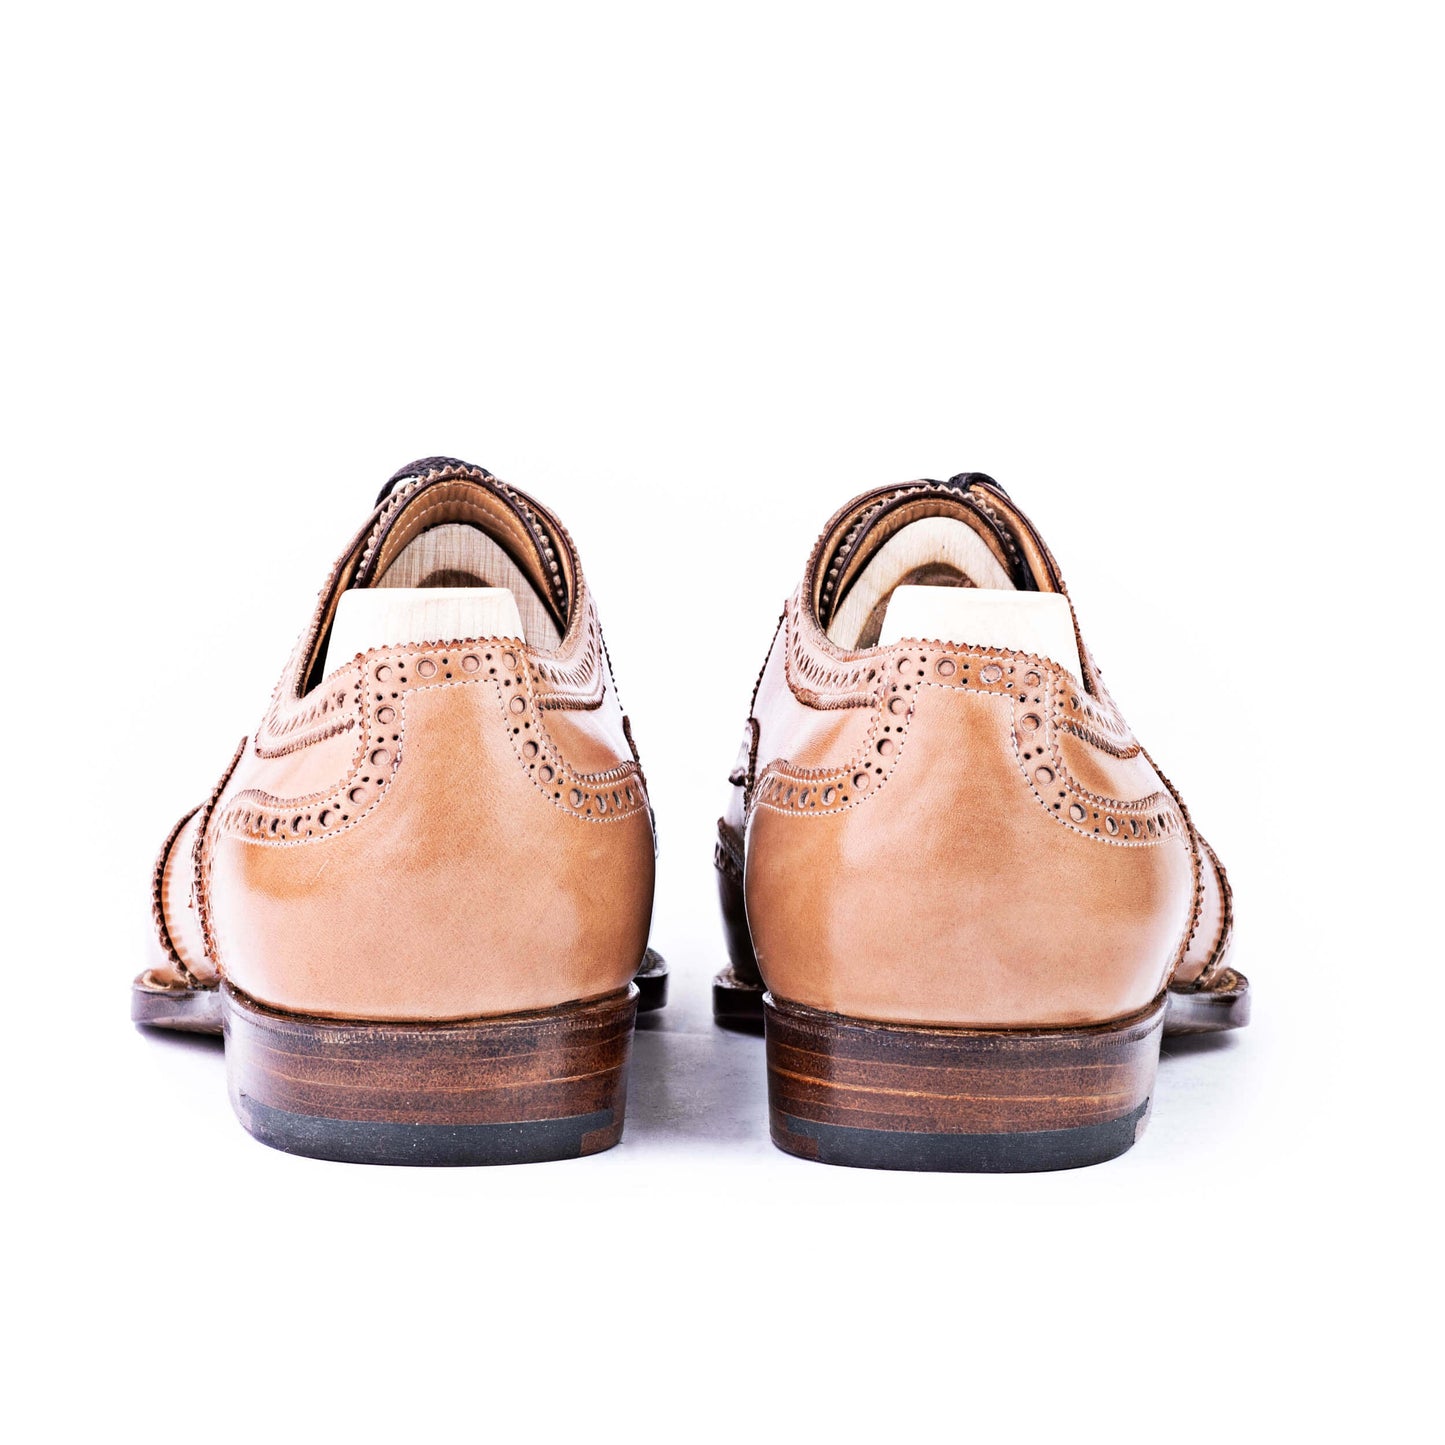 Oxford full brogueing